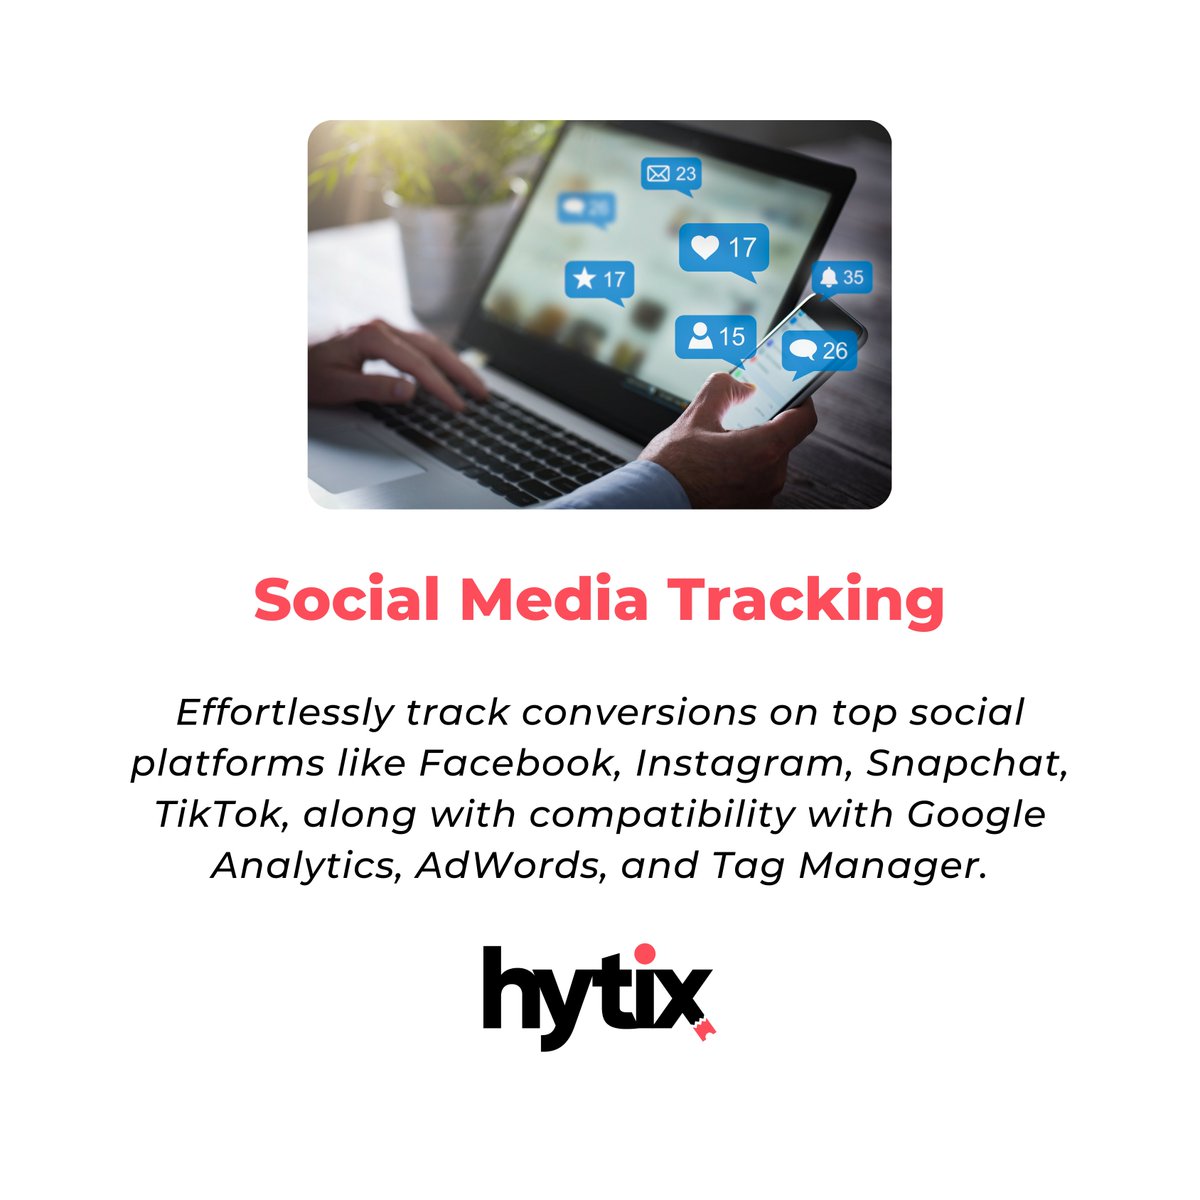 Ready to transform your event ticketing? Swipe right for seamless ticket sales, personalized emails, and powerful social media tracking with Hytix! Let's make your event unforgettable! 

#hytix #hytixticketing #eventtickets #sellingtickets #ticketingsoftware